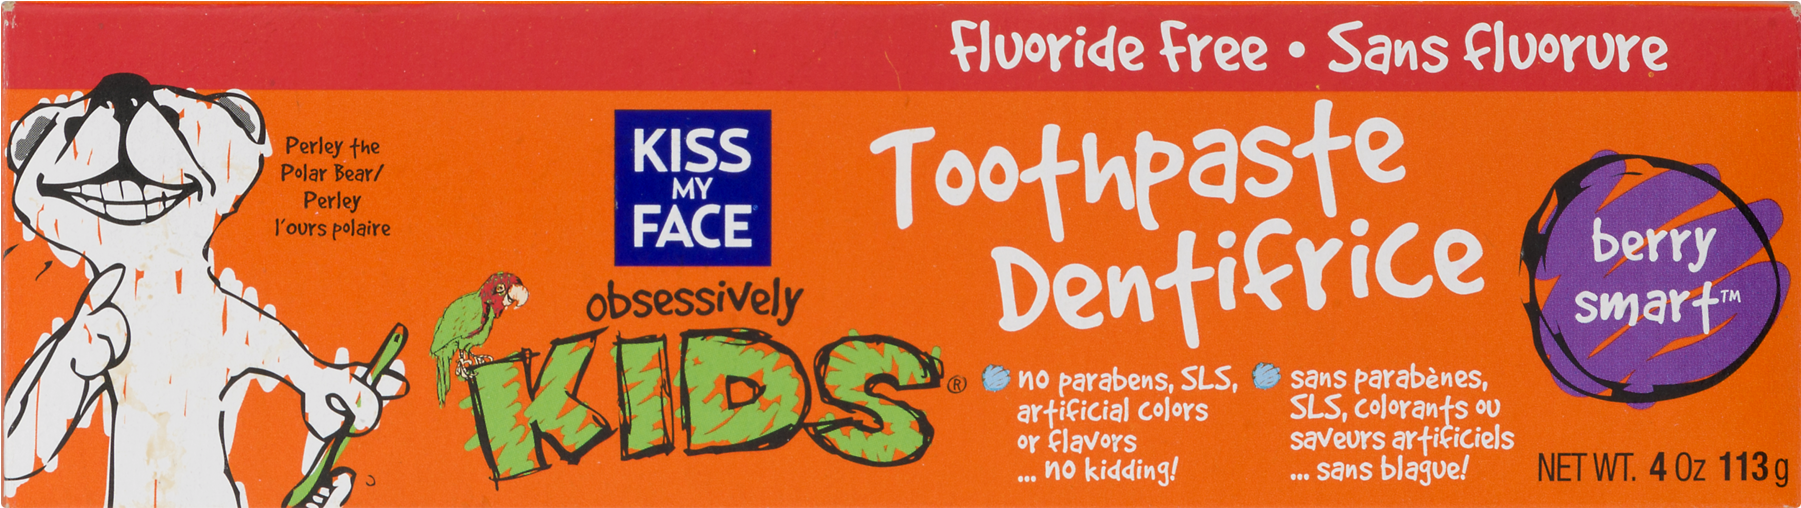 Kiss My Face Kids Fluoride Free Toothpaste, Berry Smart, - Kiss My Face - Kids Toothpaste Fluoride-free Berry (1800x1800), Png Download